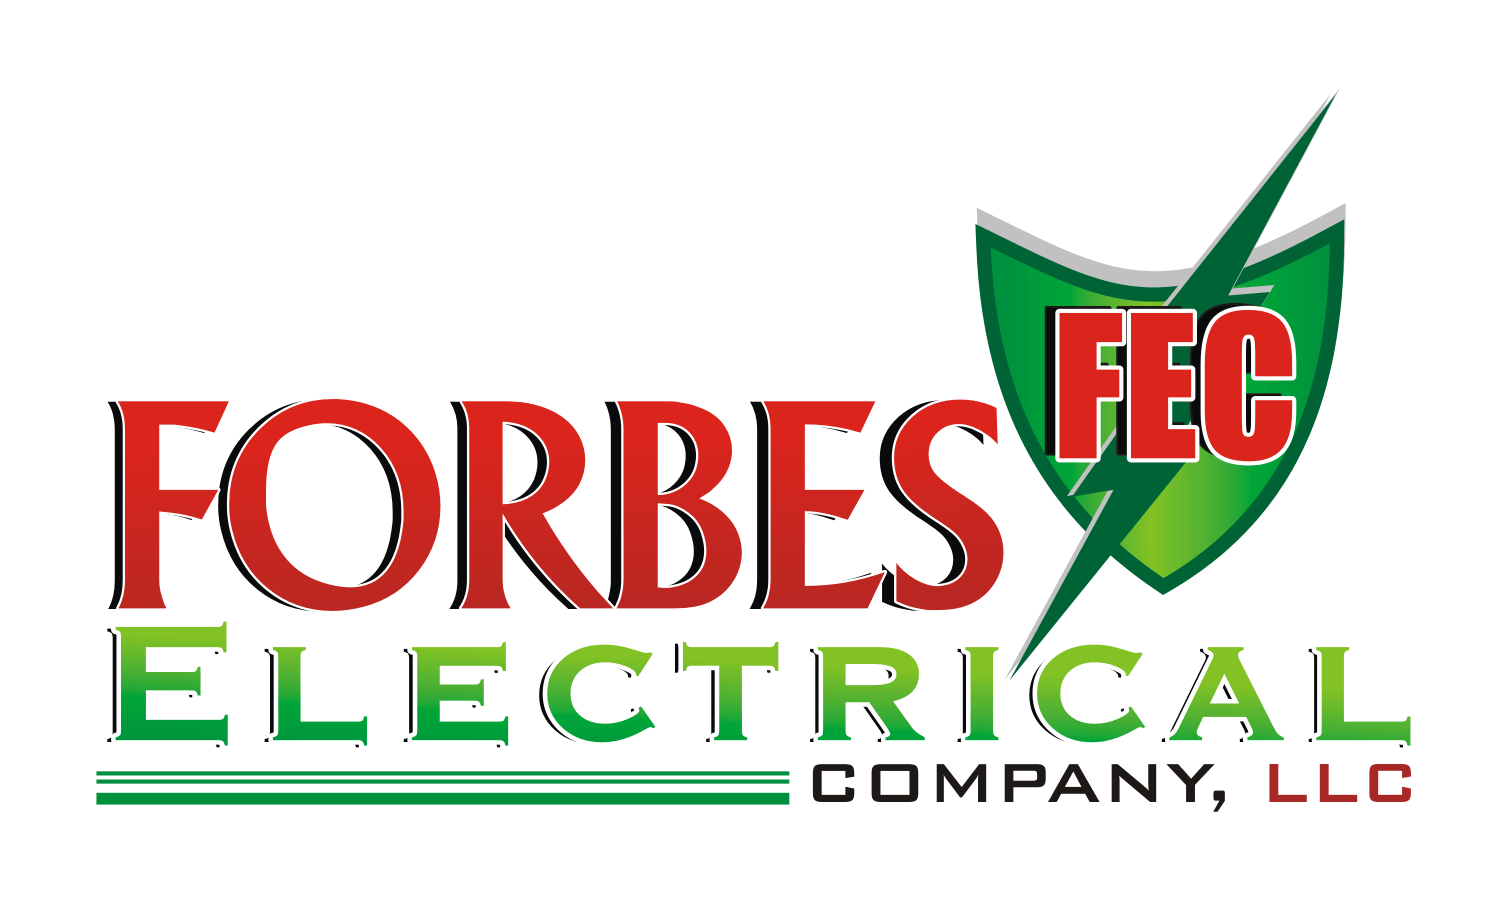 Forbes Electrical Company, LLC